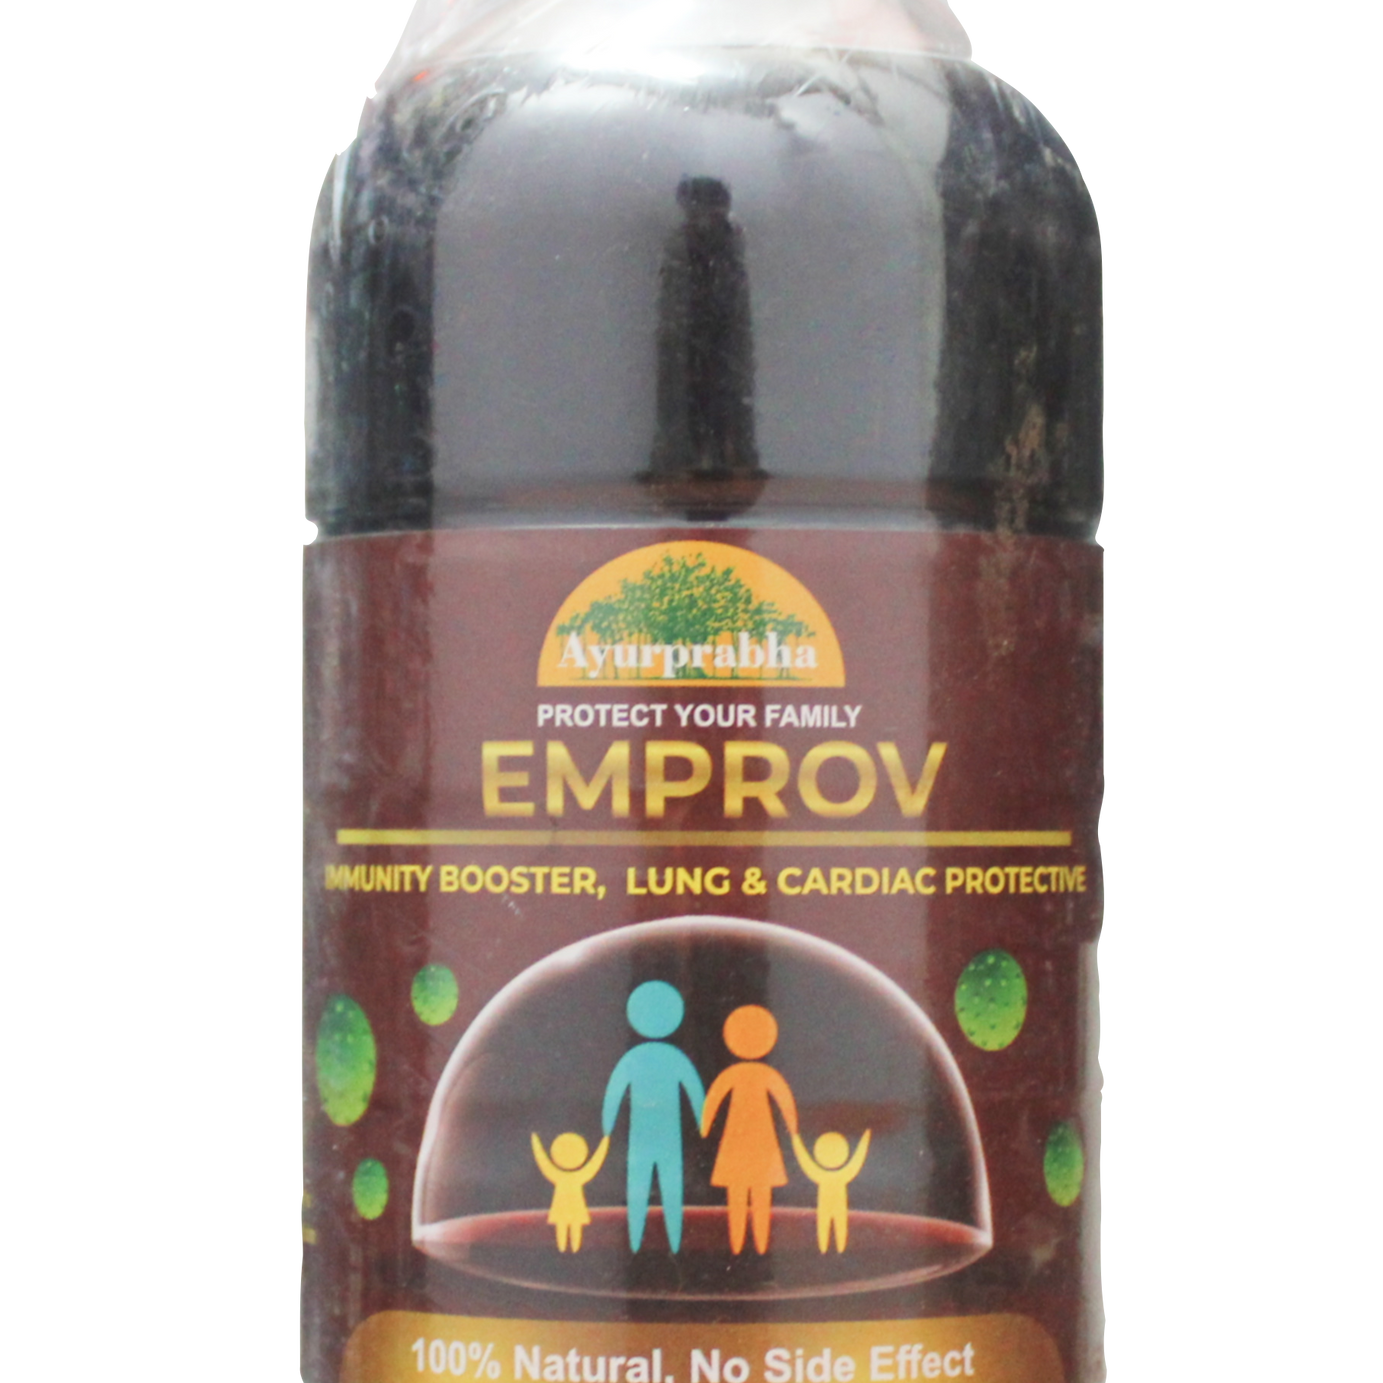 Shop Emprov syrup 450ml at price 390.00 from Ayurpraba Online - Ayush Care